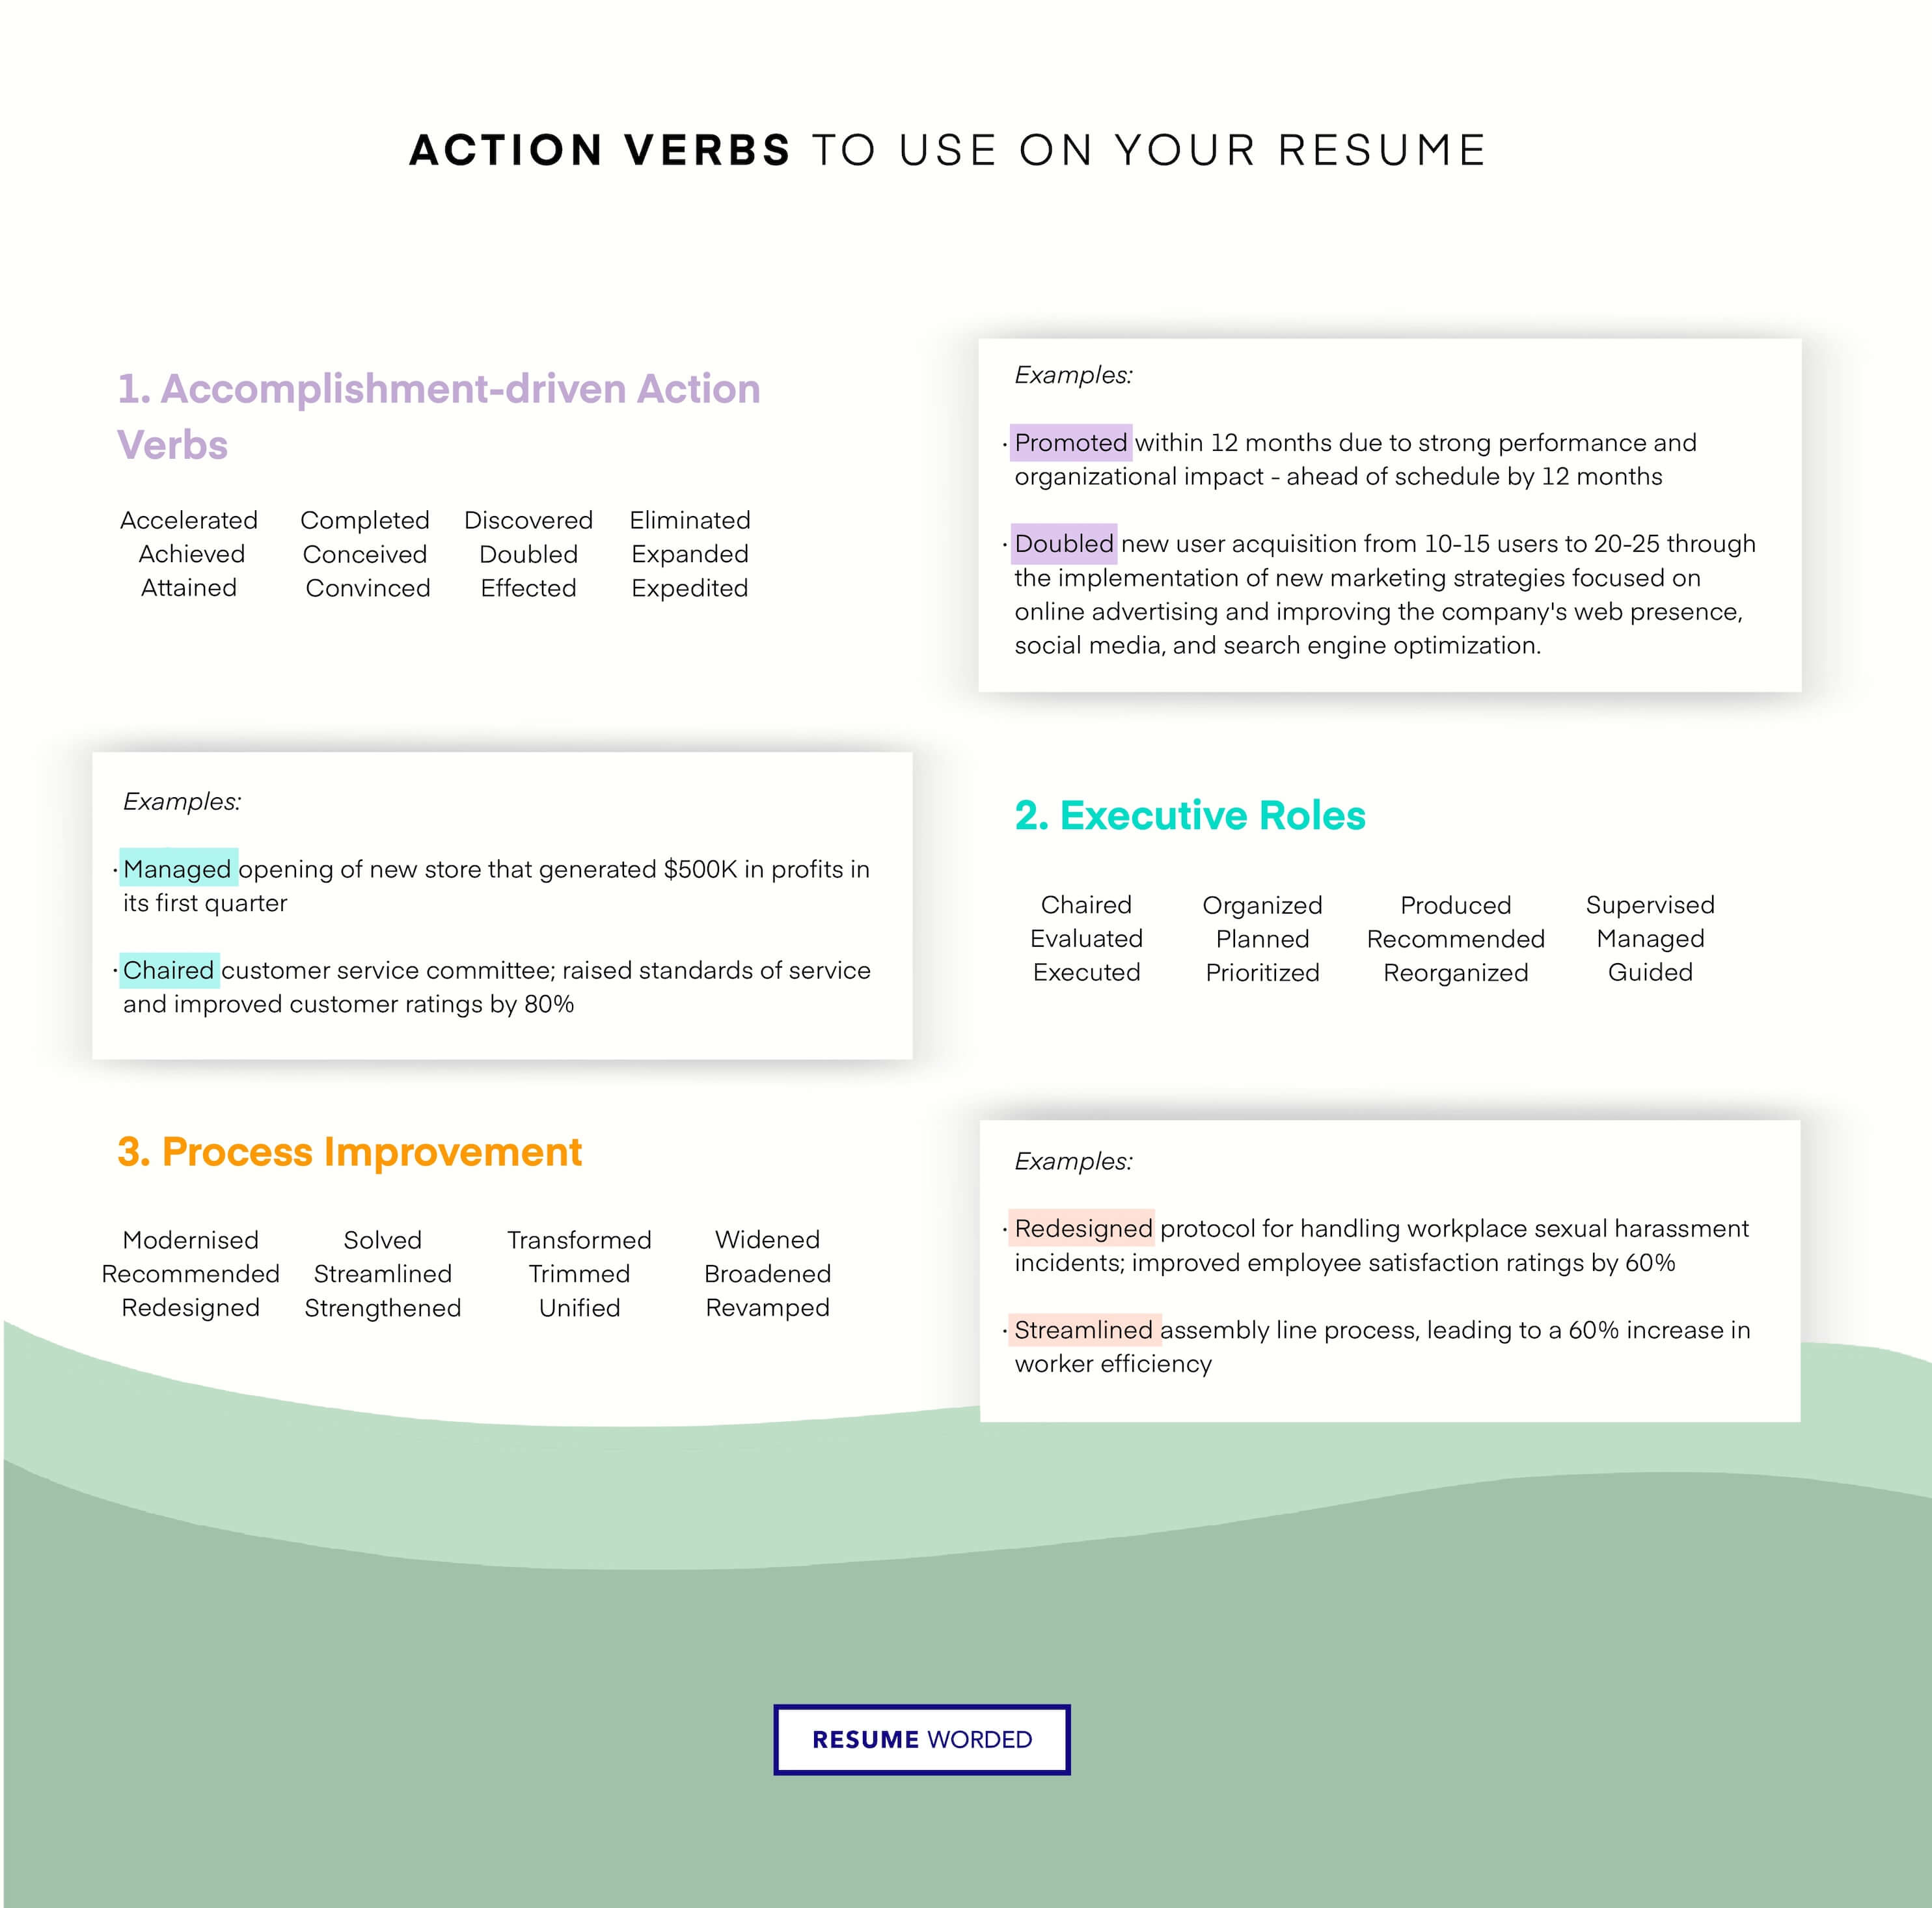 Use of action verbs relating to the creative industry and marketing - Creative Marketing Director Resume